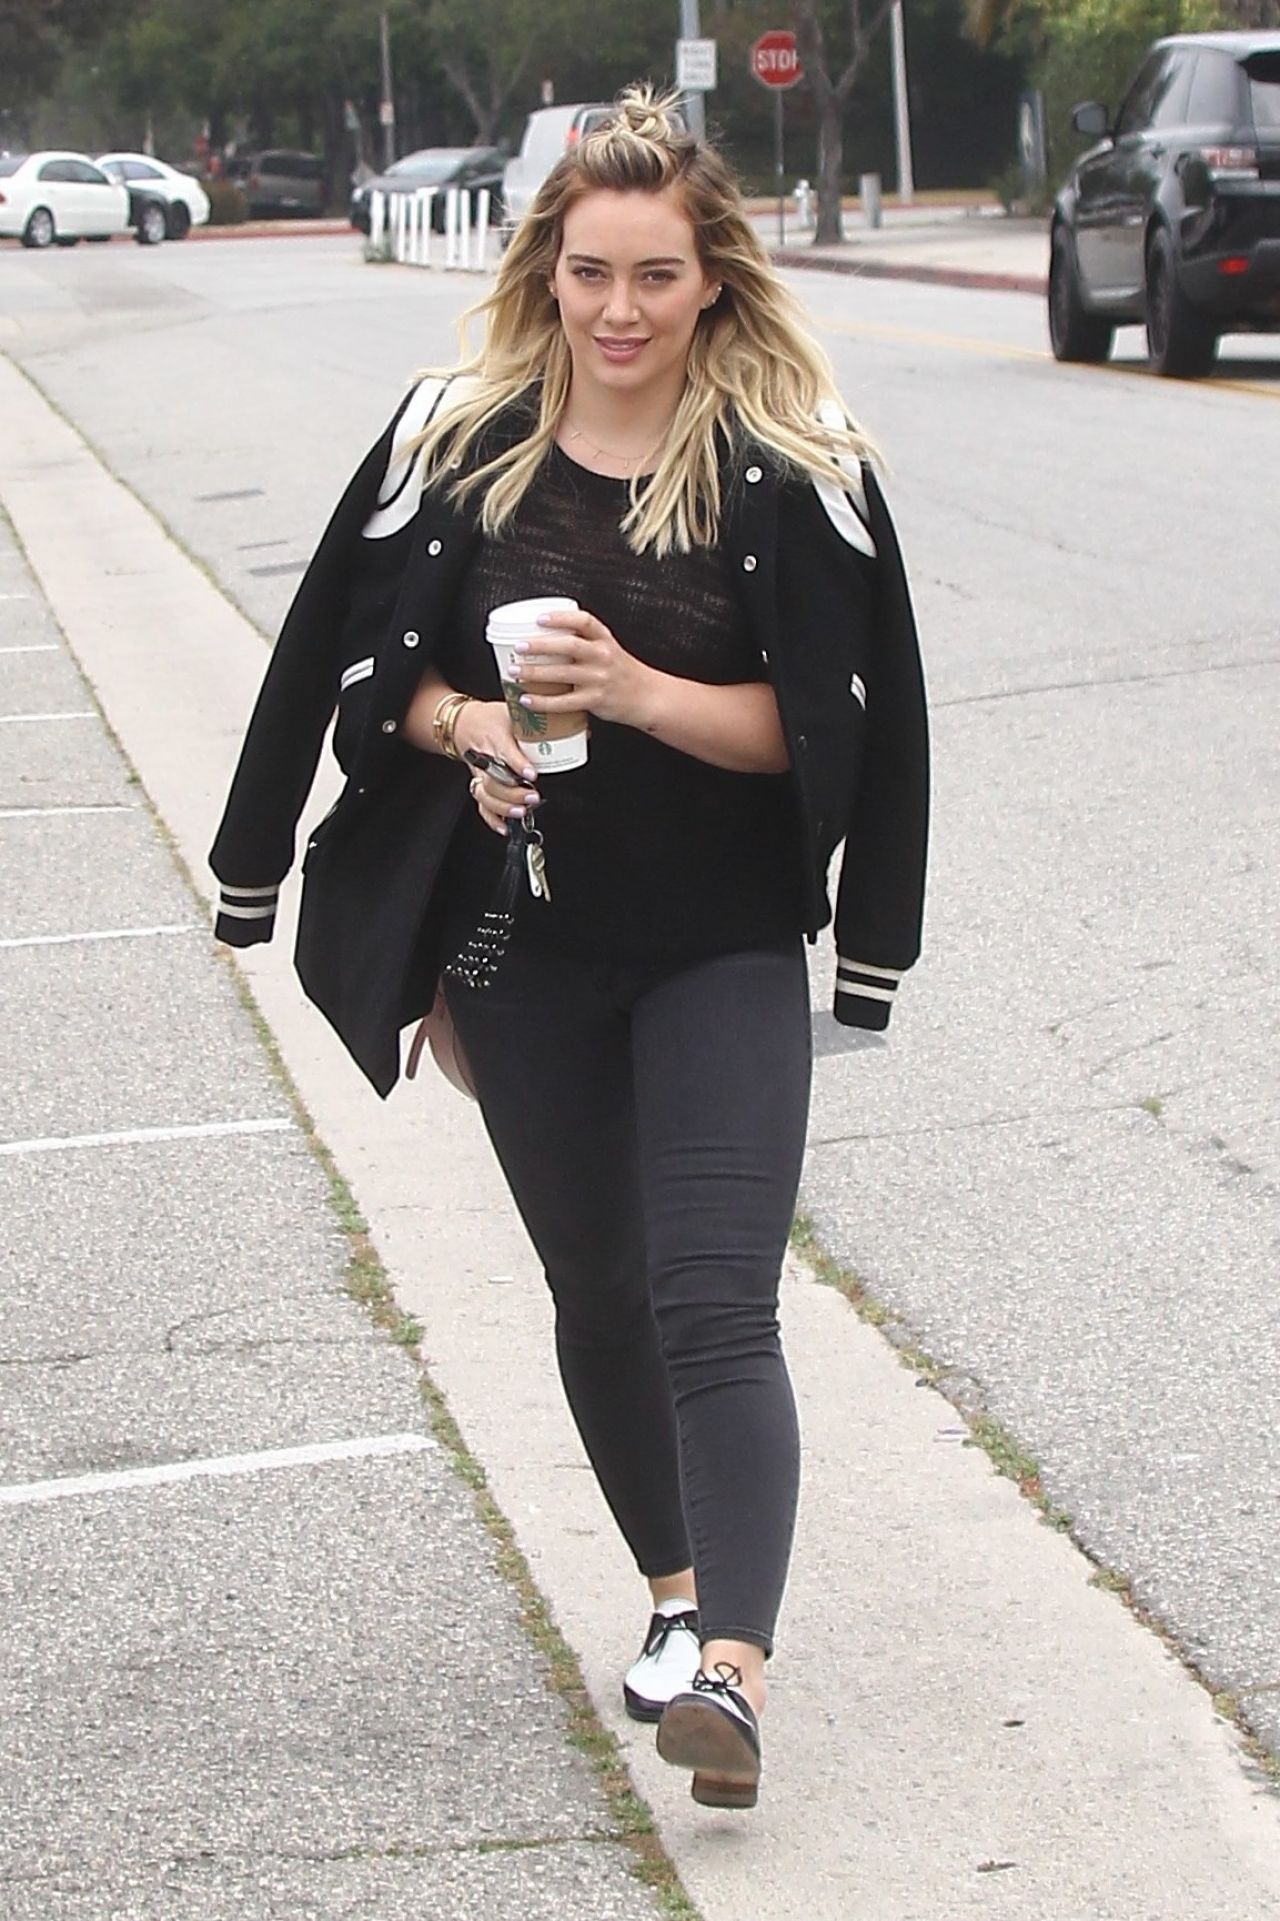 Hilary Duff in Tights - Leaving an Office Building in Beverly Hills 5/4 ...